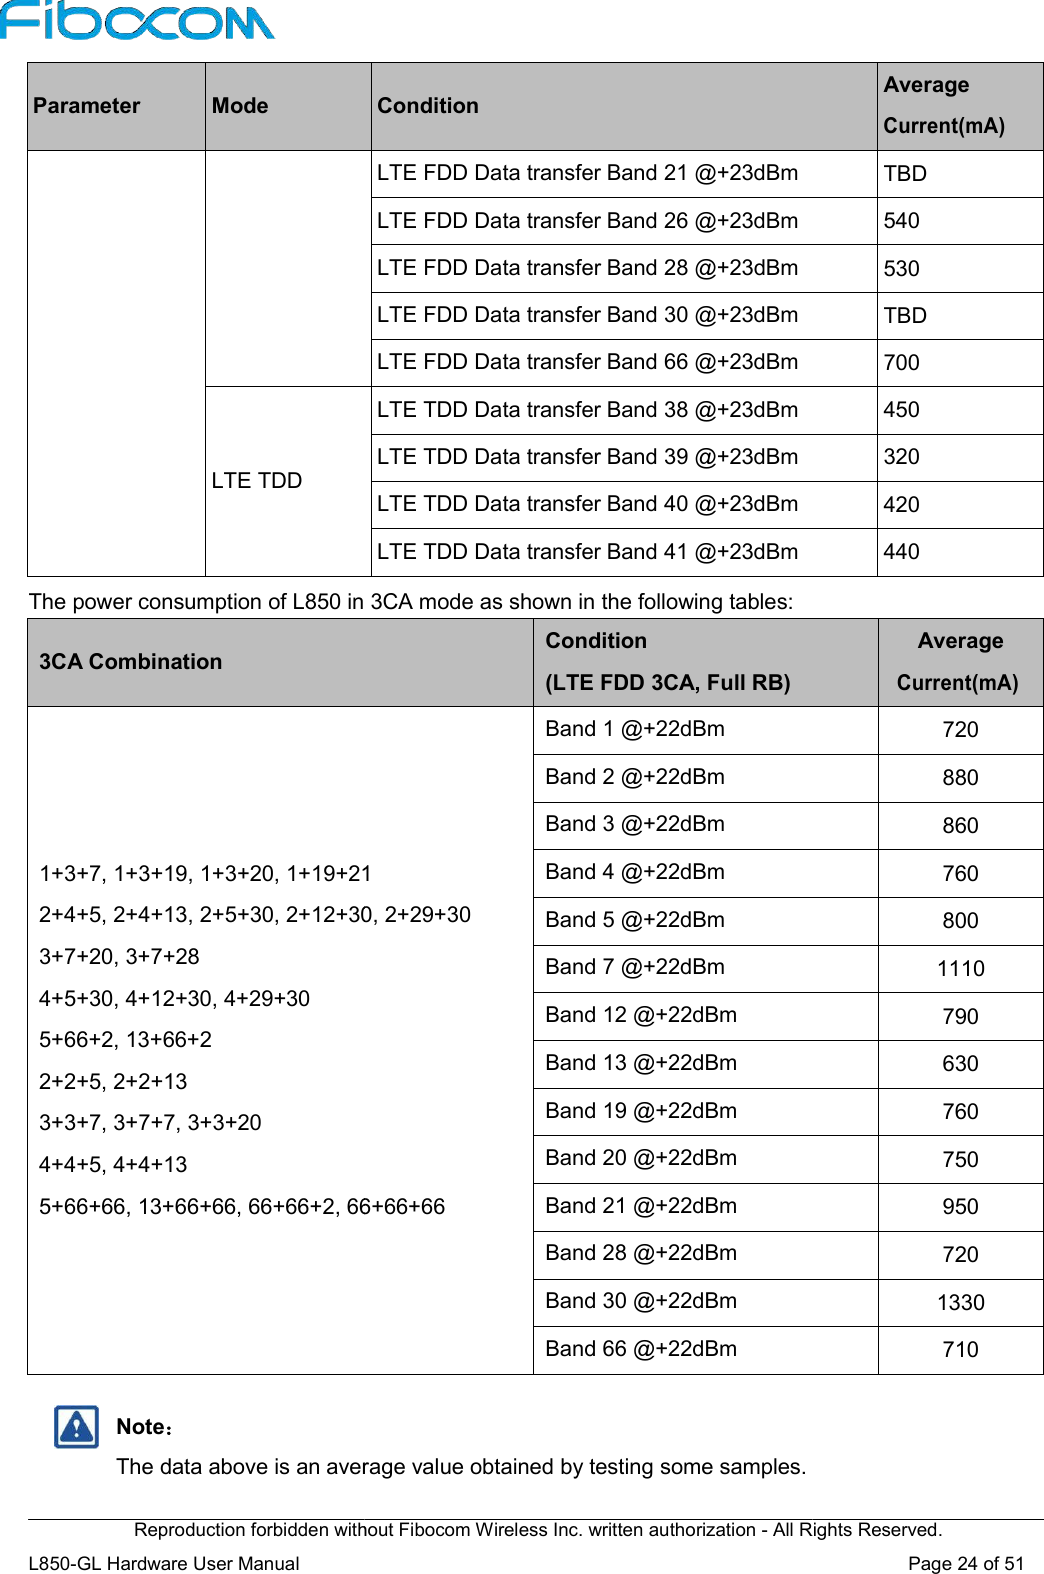 Reproduction forbidden without Fibocom Wireless Inc. written authorization L850-GL Hardware User Manual     Parameter  Mode       LTE TDD The power consumption of L850 in 3CA mode as shown in the following tables: 3CA Combination       1+3+7, 1+3+19, 1+3+20, 1+19+212+4+5, 2+4+13, 2+5+30, 2+12+30, 2+29+303+7+20, 3+7+28 4+5+30, 4+12+30, 4+29+30 5+66+2, 13+66+2 2+2+5, 2+2+13 3+3+7, 3+7+7, 3+3+20 4+4+5, 4+4+13 5+66+66, 13+66+66, 66+66+2, 66+66+66    Note： The data above is an average value obtained by testing some samples.Reproduction forbidden without Fibocom Wireless Inc. written authorization - All Rights Reserved. Condition LTE FDD Data transfer Band 21 @+23dBm LTE FDD Data transfer Band 26 @+23dBm LTE FDD Data transfer Band 28 @+23dBm LTE FDD Data transfer Band 30 @+23dBm LTE FDD Data transfer Band 66 @+23dBm LTE TDD Data transfer Band 38 @+23dBm LTE TDD Data transfer Band 39 @+23dBm LTE TDD Data transfer Band 40 @+23dBm LTE TDD Data transfer Band 41 @+23dBm The power consumption of L850 in 3CA mode as shown in the following tables: Condition (LTE FDD 3CA, Full RB) 1+3+7, 1+3+19, 1+3+20, 1+19+21 2+4+13, 2+5+30, 2+12+30, 2+29+30 5+66+66, 13+66+66, 66+66+2, 66+66+66 Band 1 @+22dBm Band 2 @+22dBm Band 3 @+22dBm Band 4 @+22dBm Band 5 @+22dBm Band 7 @+22dBm Band 12 @+22dBm Band 13 @+22dBm Band 19 @+22dBm Band 20 @+22dBm Band 21 @+22dBm Band 28 @+22dBm Band 30 @+22dBm Band 66 @+22dBm average value obtained by testing some samples. All Rights Reserved. Page 24 of 51 Average Current(mA)  TBD  540  530  TBD  700  450  320  420  440 Average Current(mA) 720 880 860 760 800 1110 790 630 760 750 950 720 1330 710  